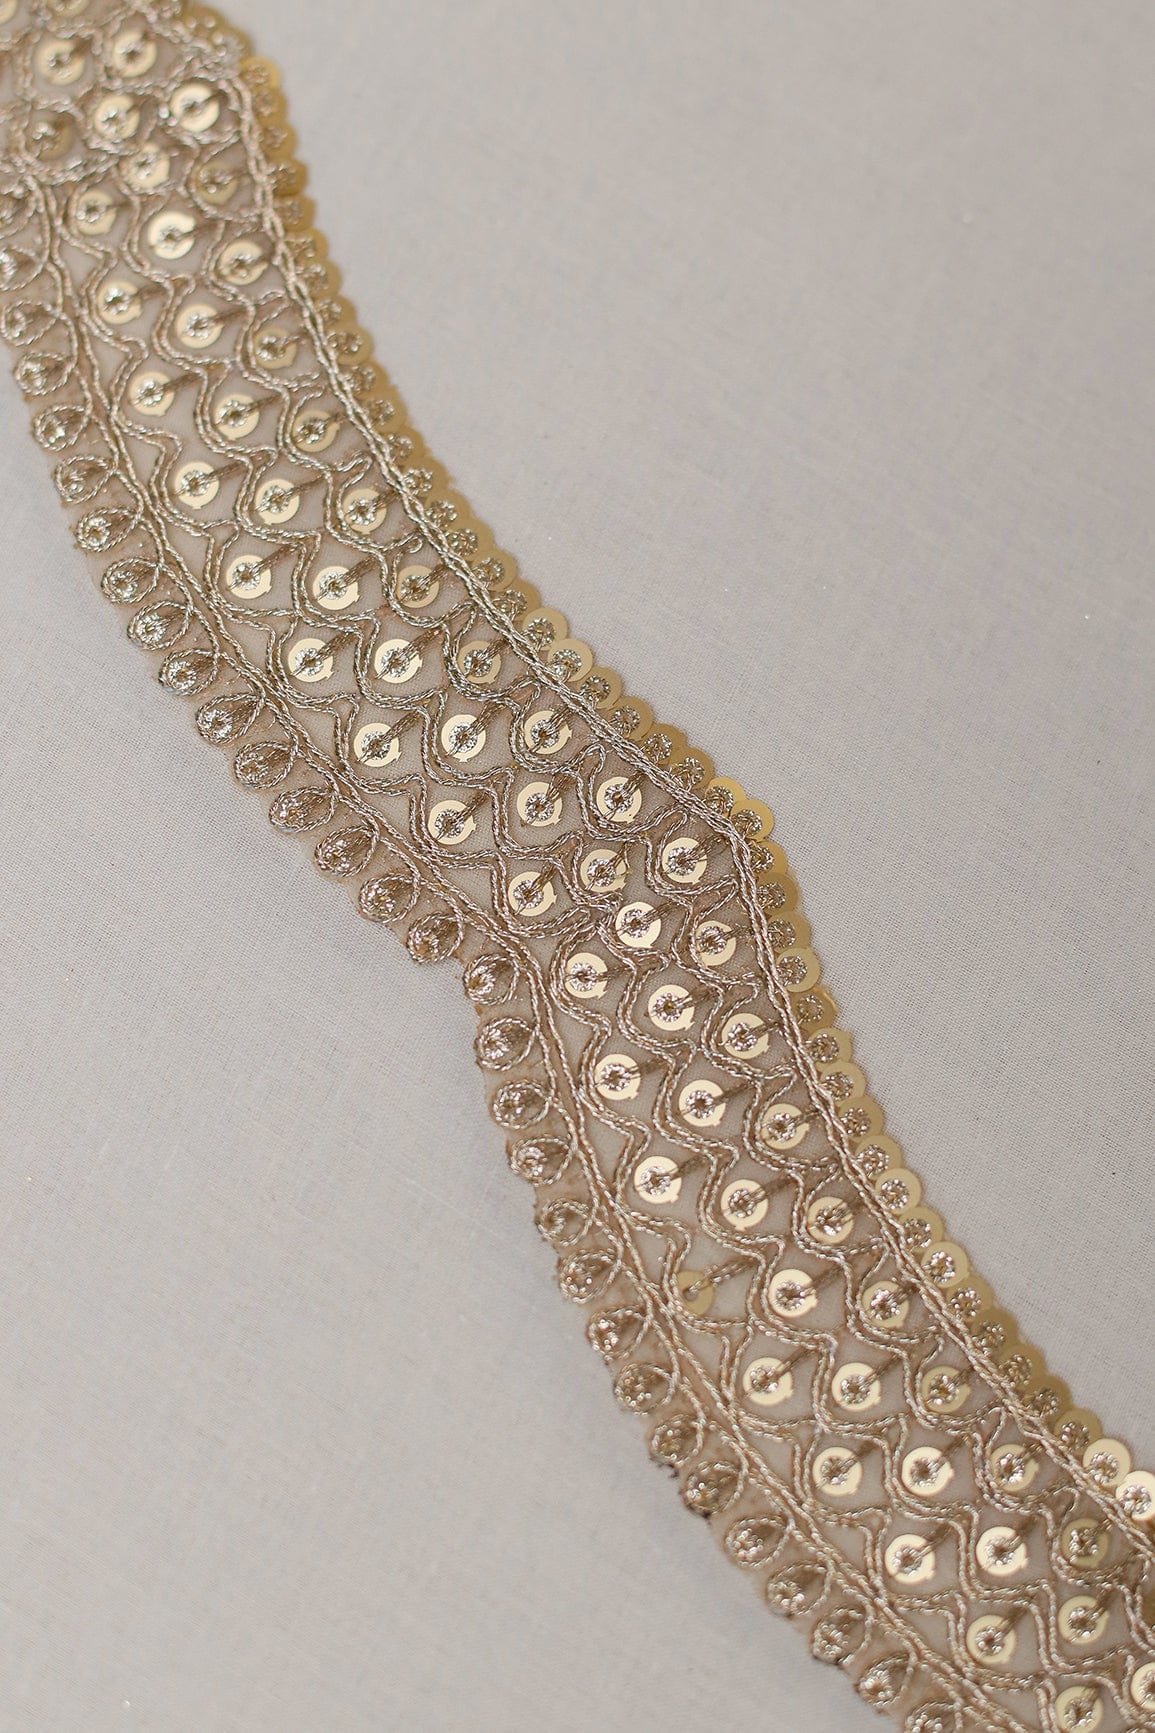 doeraa Laces Gold Zari With Gold Sequins Embroidered Lace (9 Meters)